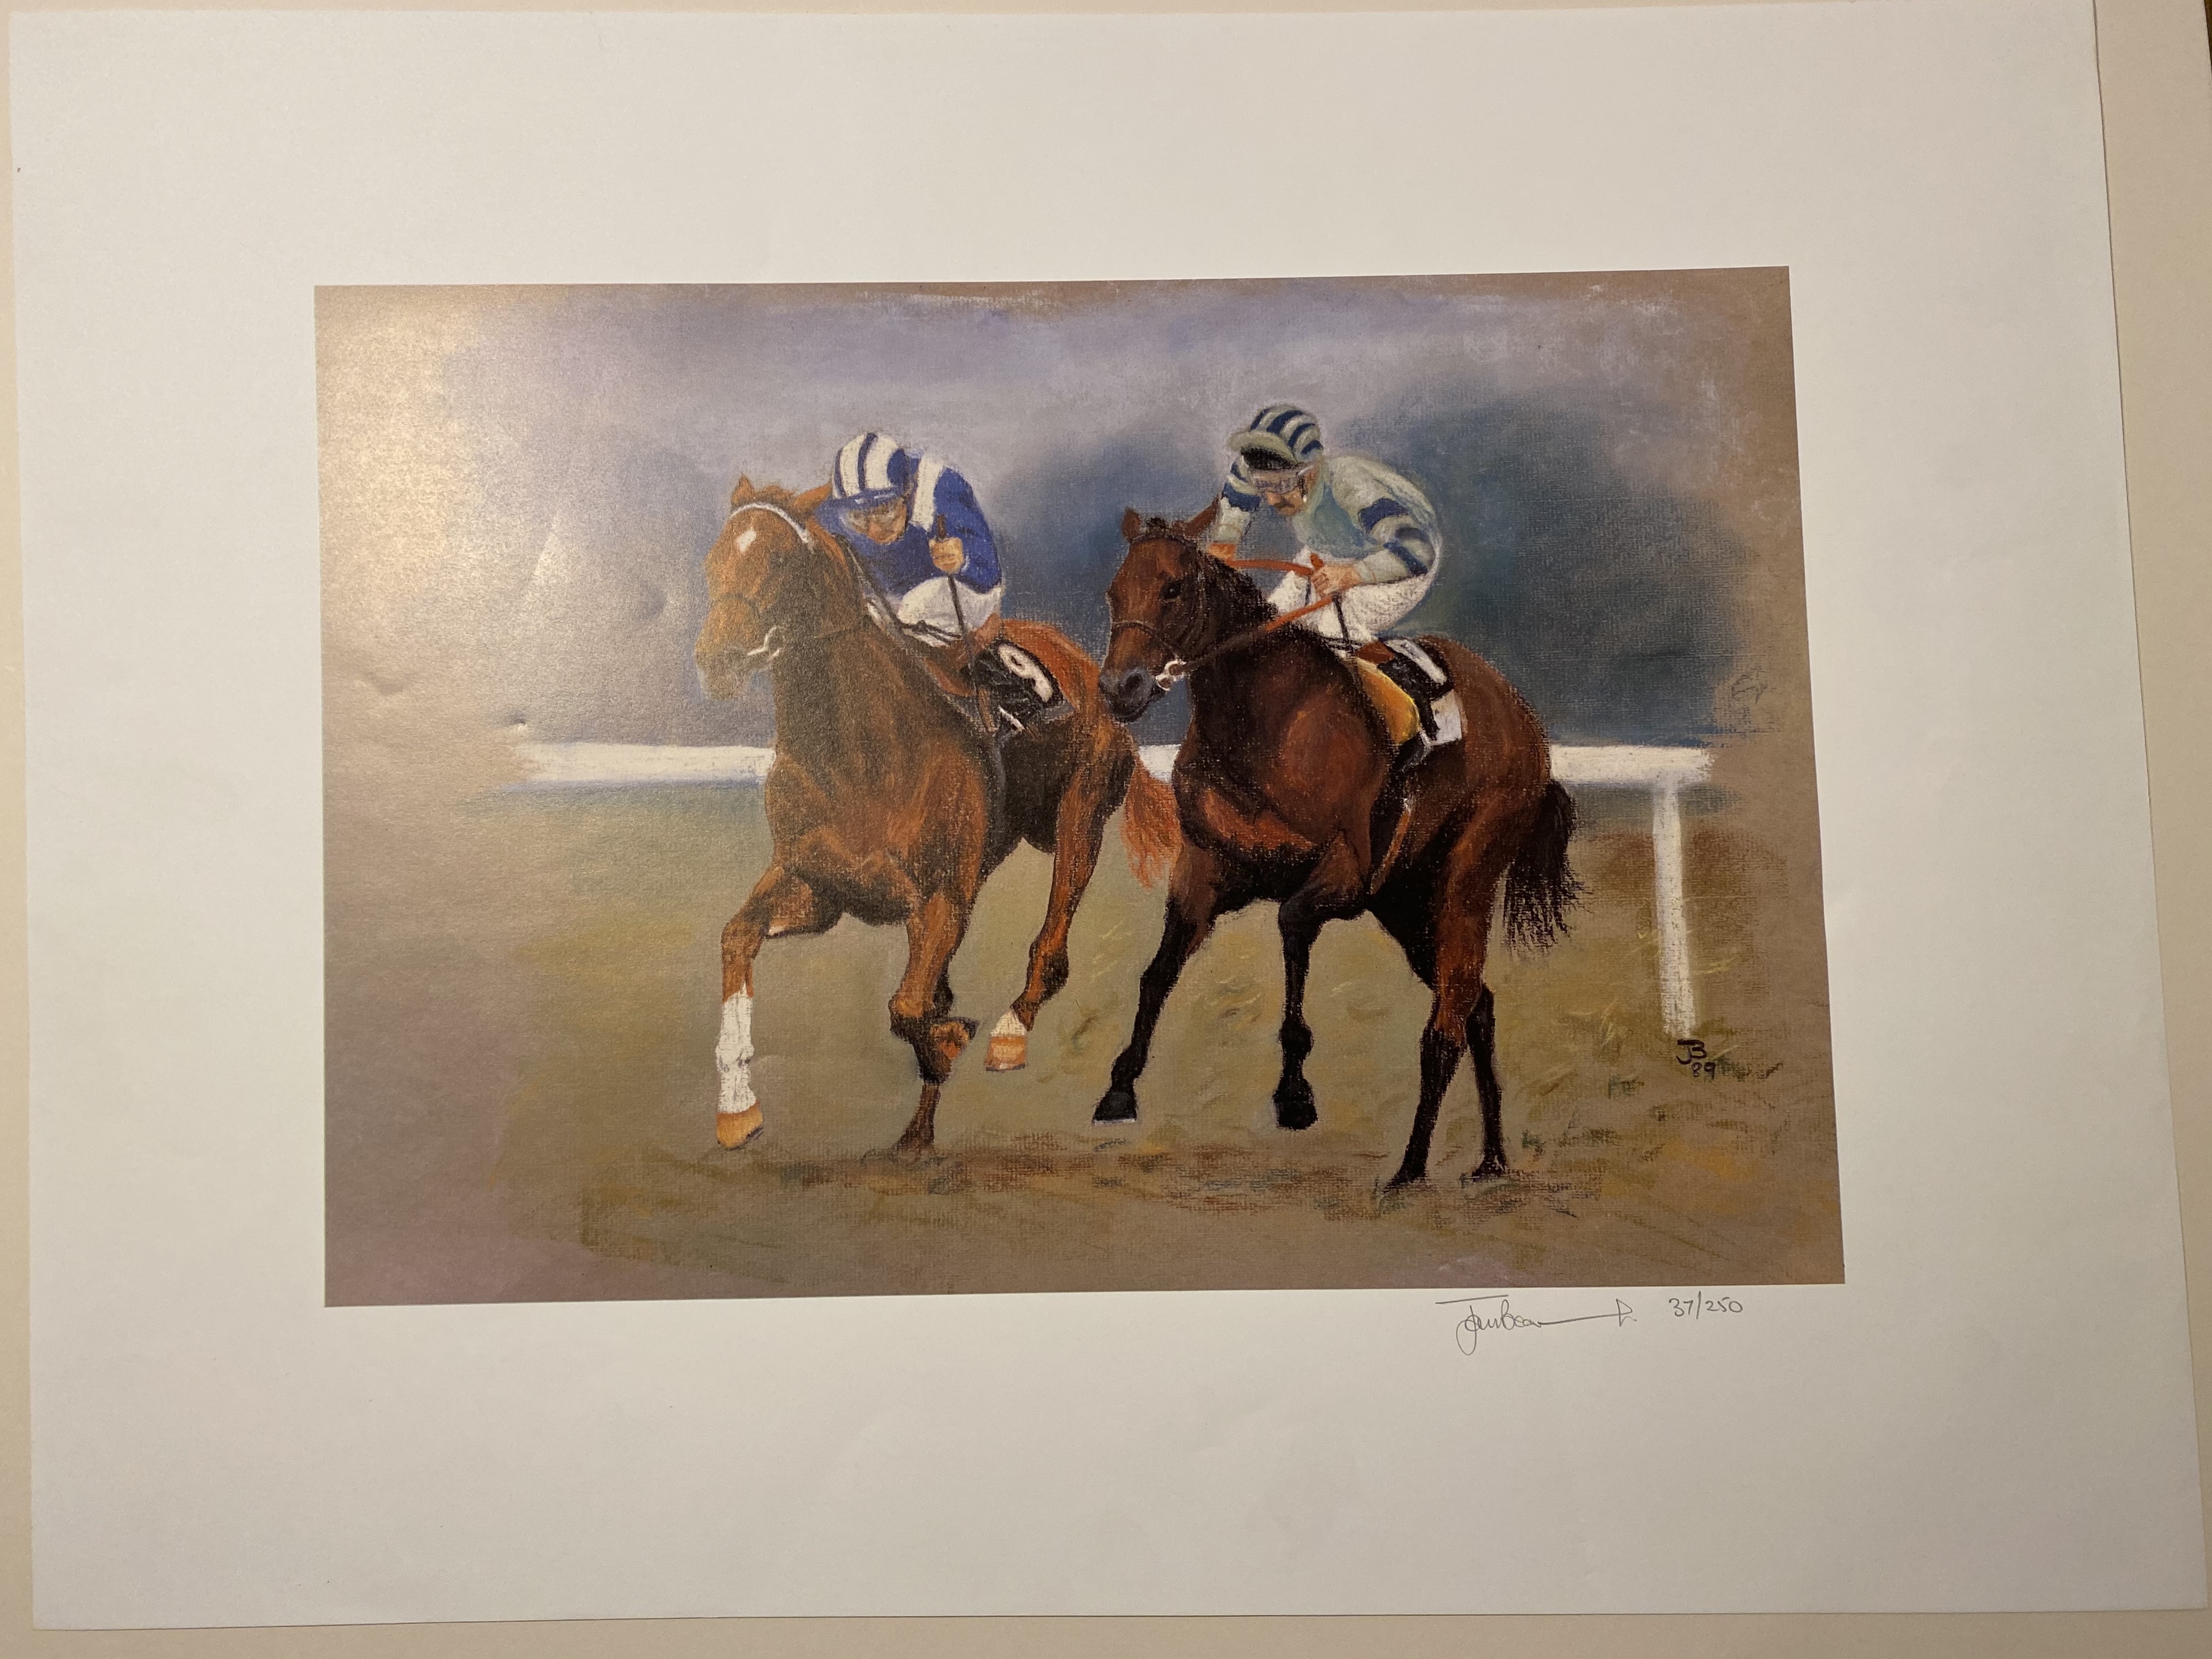 Jan F Beaumont Limited Edition Print, Nathan & Cacoethes 1989